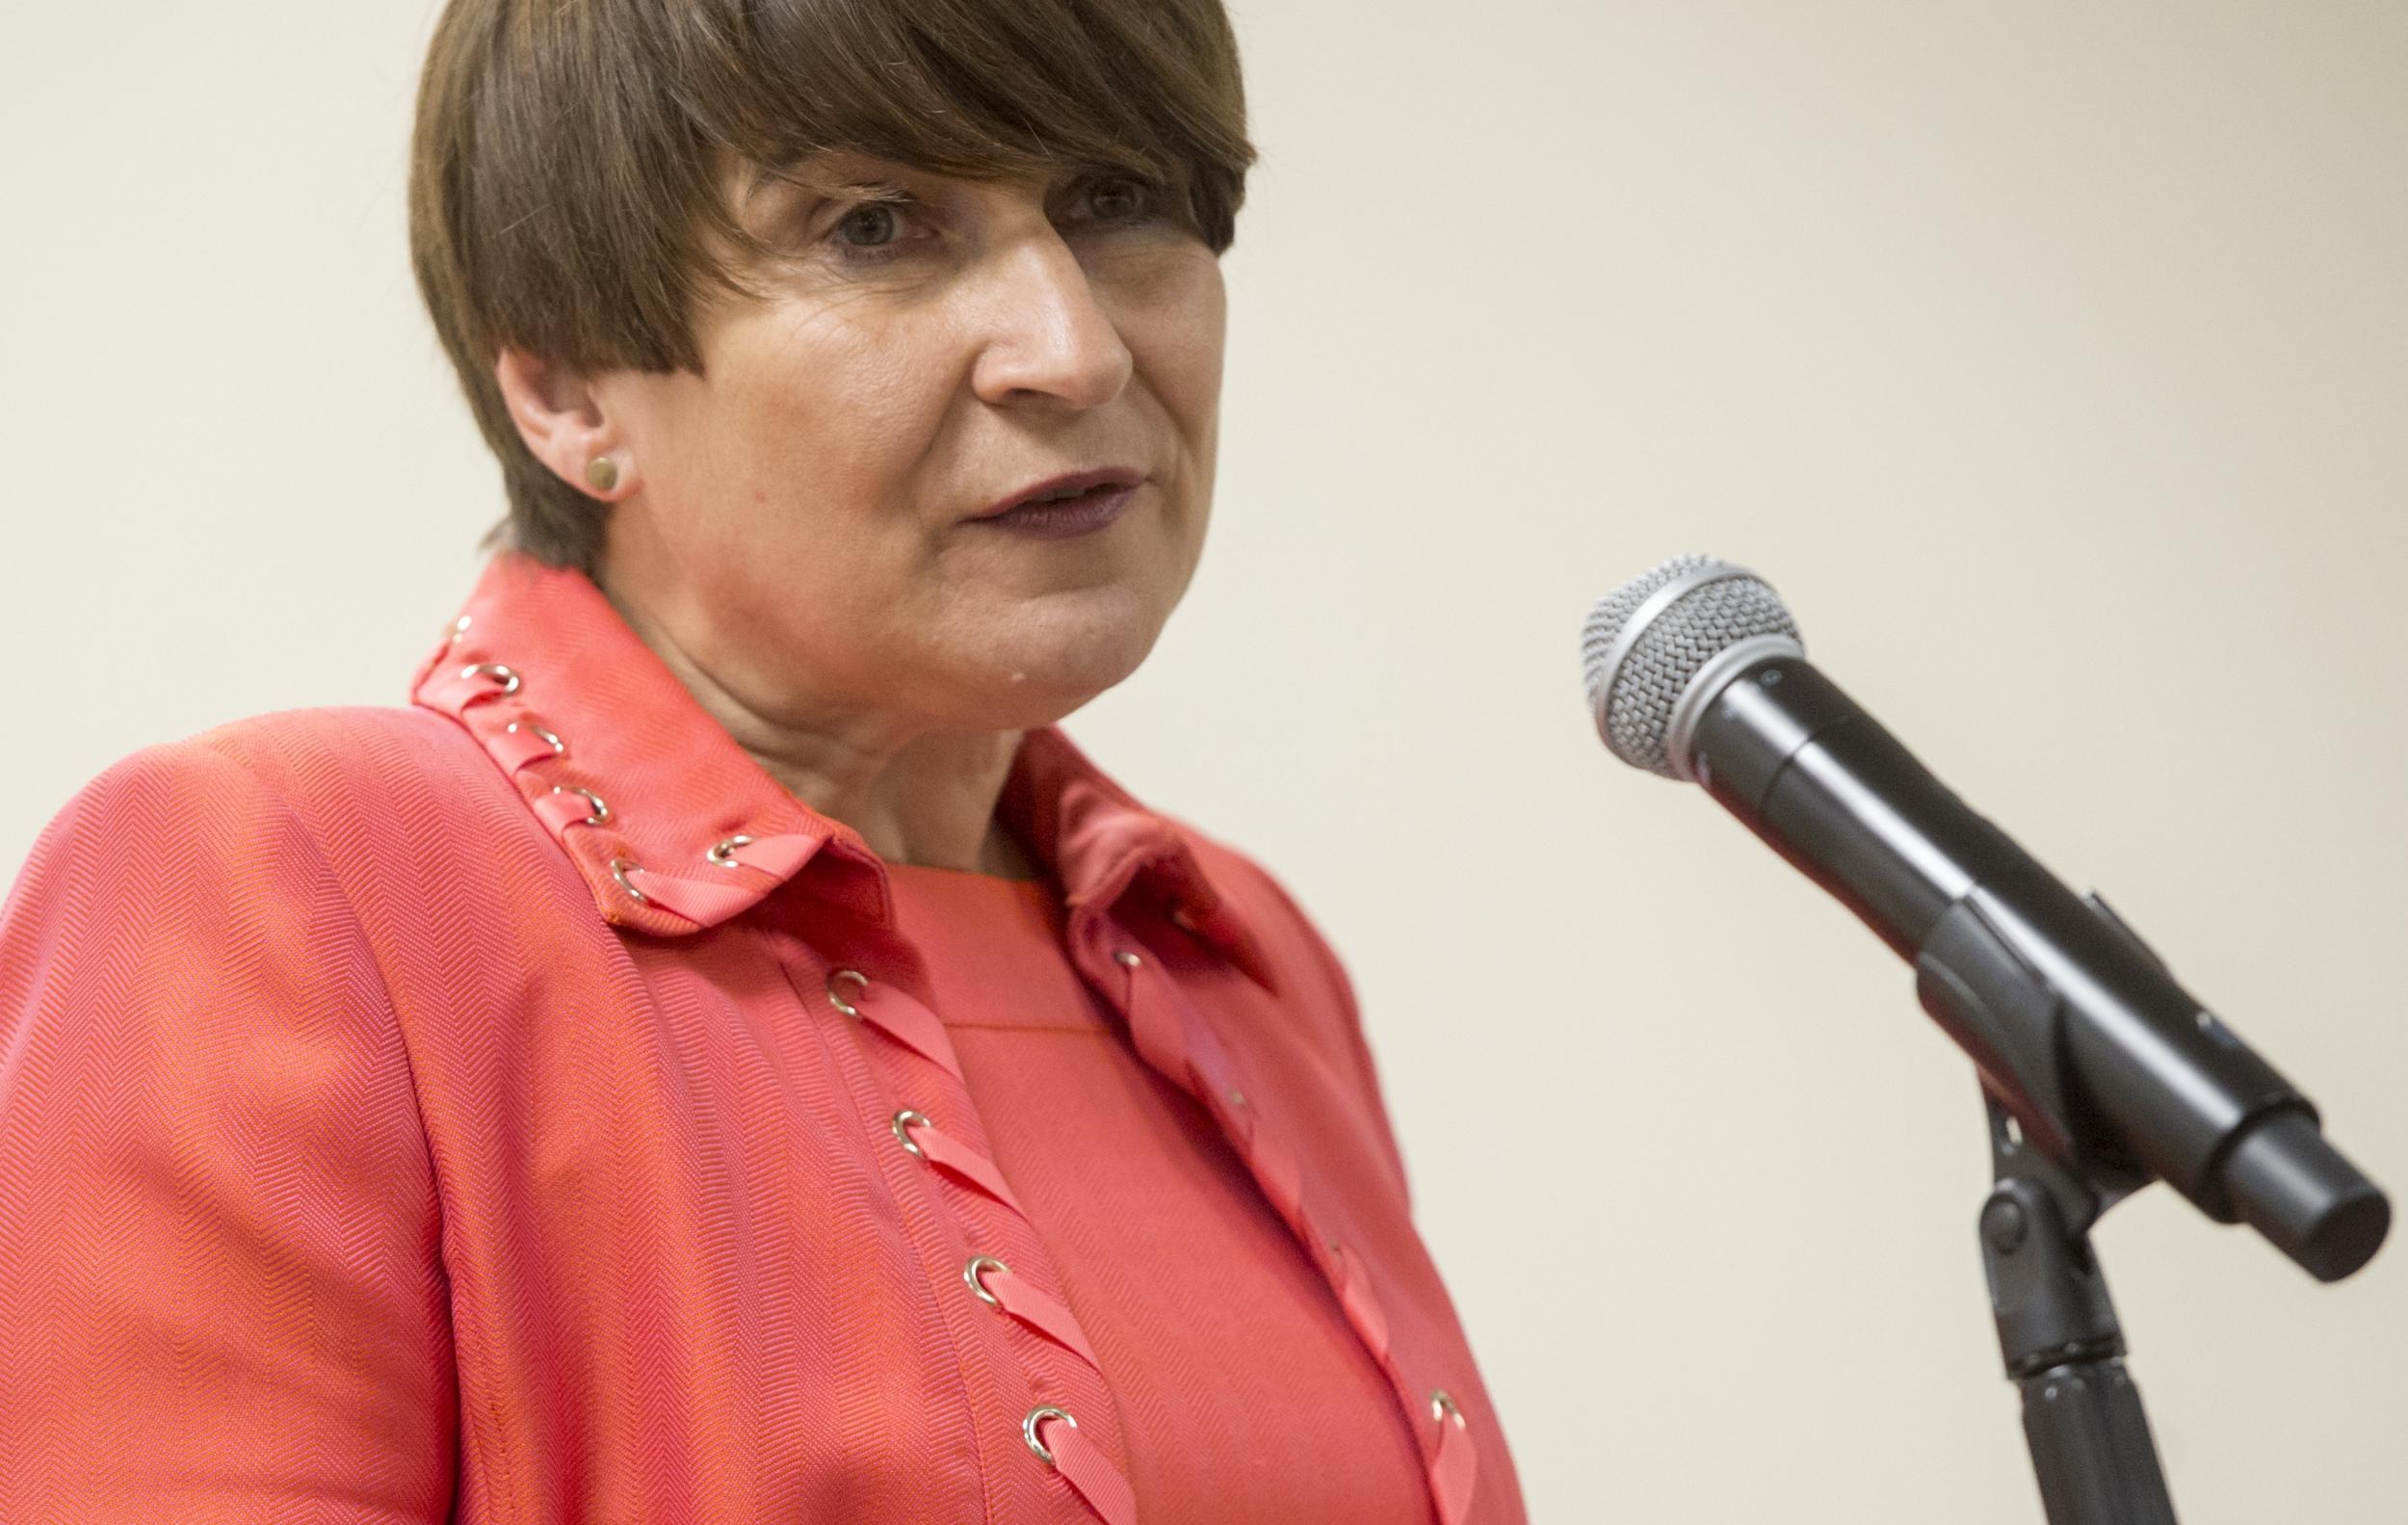 Lilianne Ploumen, Dutch Minister of Foreign Trade and Development Cooperation, speaks during a Global Gender Forum on Women's Empowerment and Sexual Health